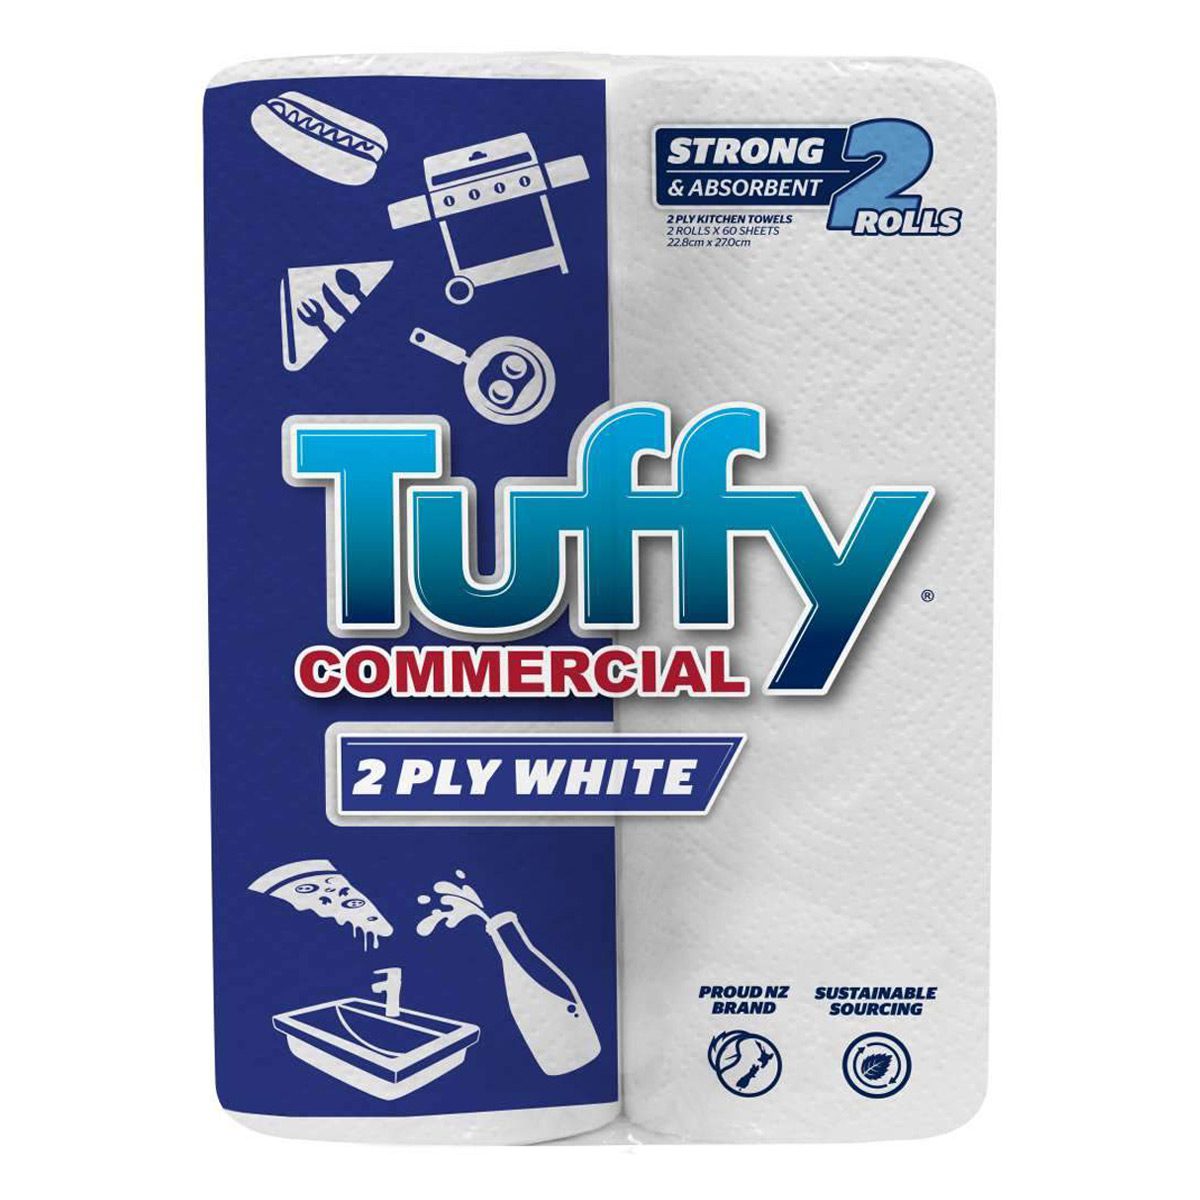 paper-products-paper-towels-tuffy-commercial-kitchen-towel-twin-pack-absorbency-and-strength-perfect-for-cleaning-up-everyday-spills-kitchen-food-preparation-vjs-distributors-3459